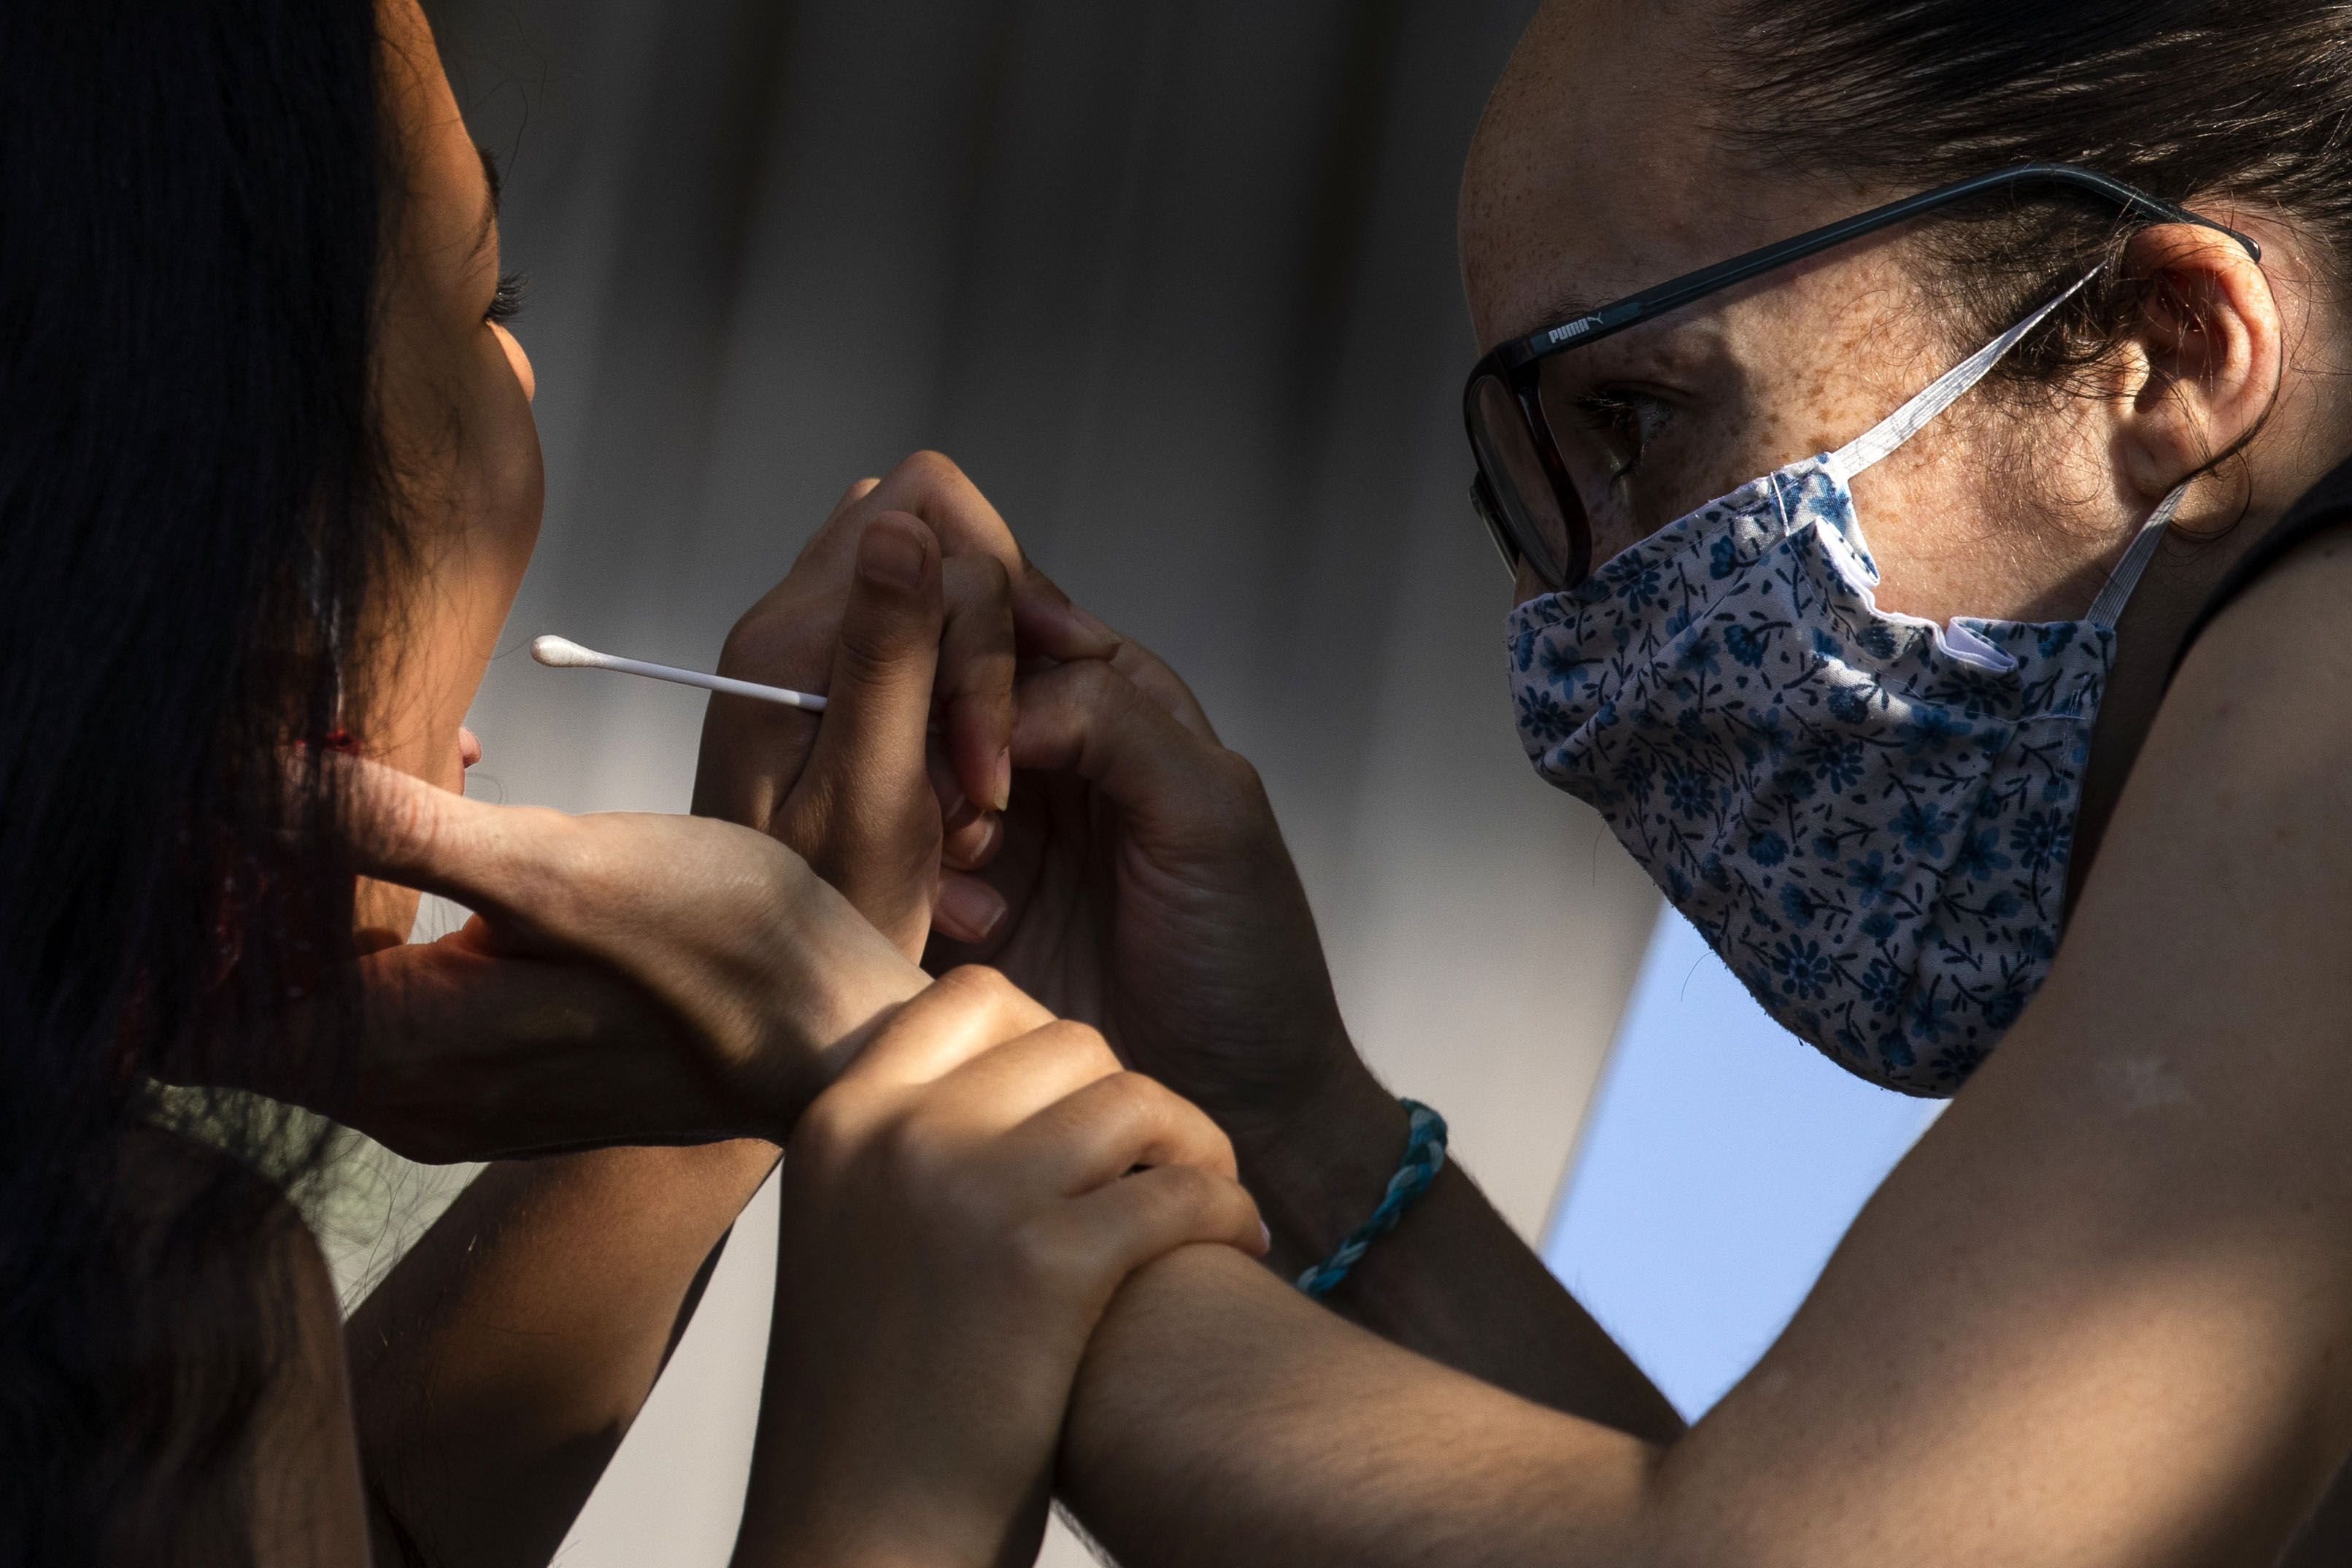 A woman administers a swab test at a Covid-19 testing site in London on September 15.